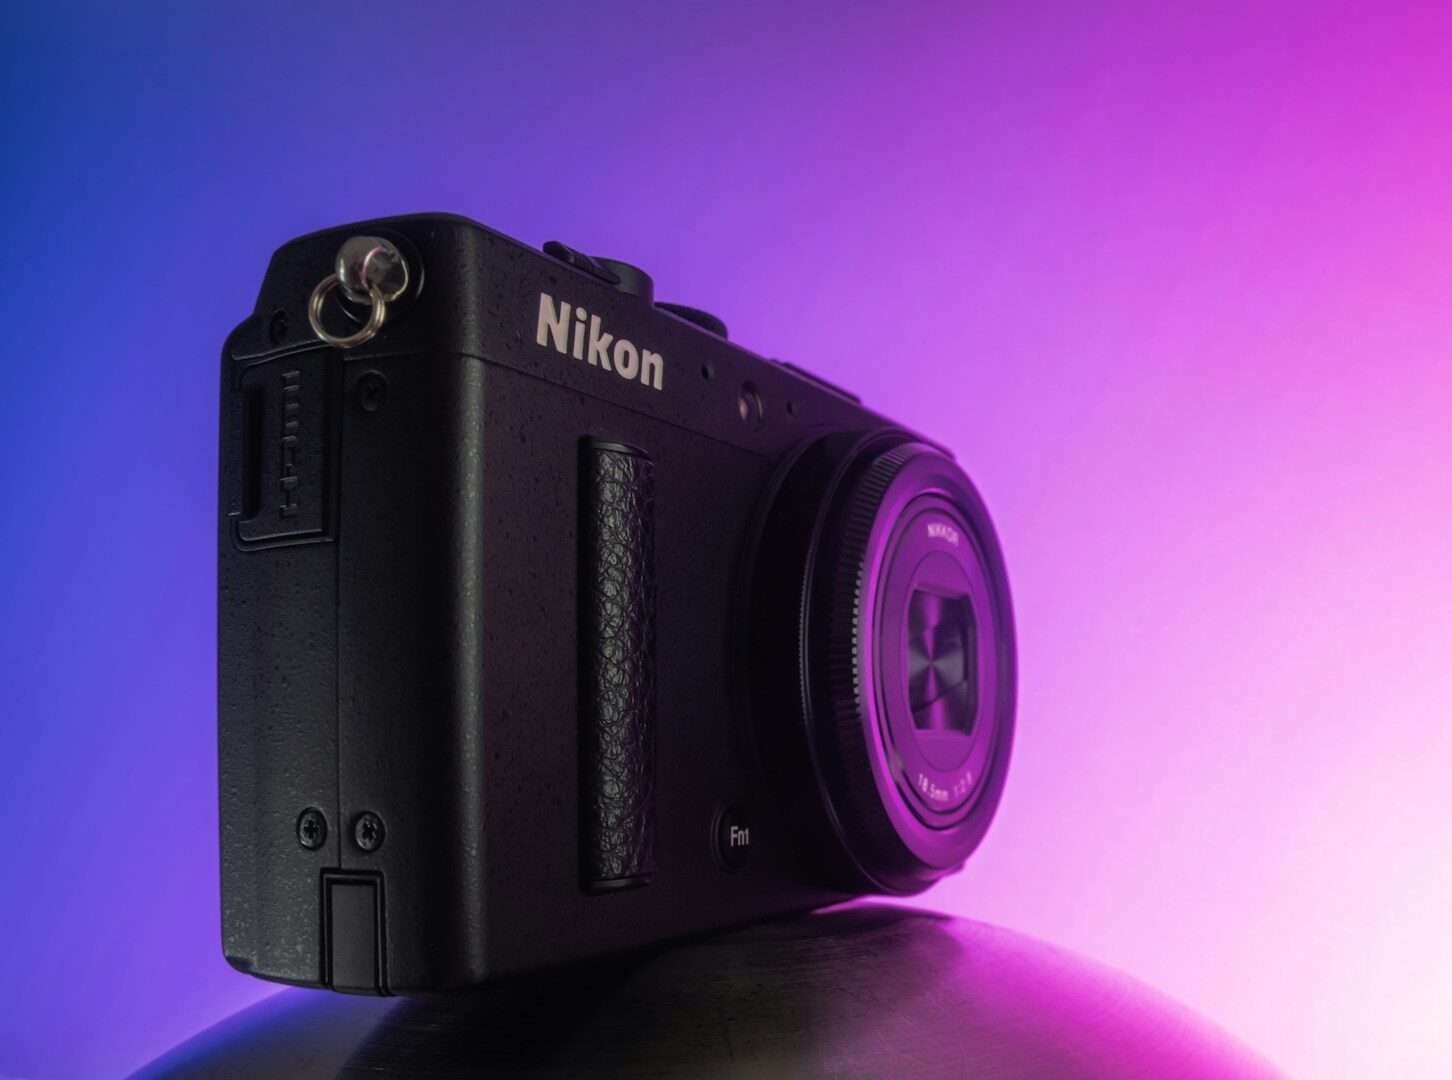 How to Charge a Nikon Coolpix Camera